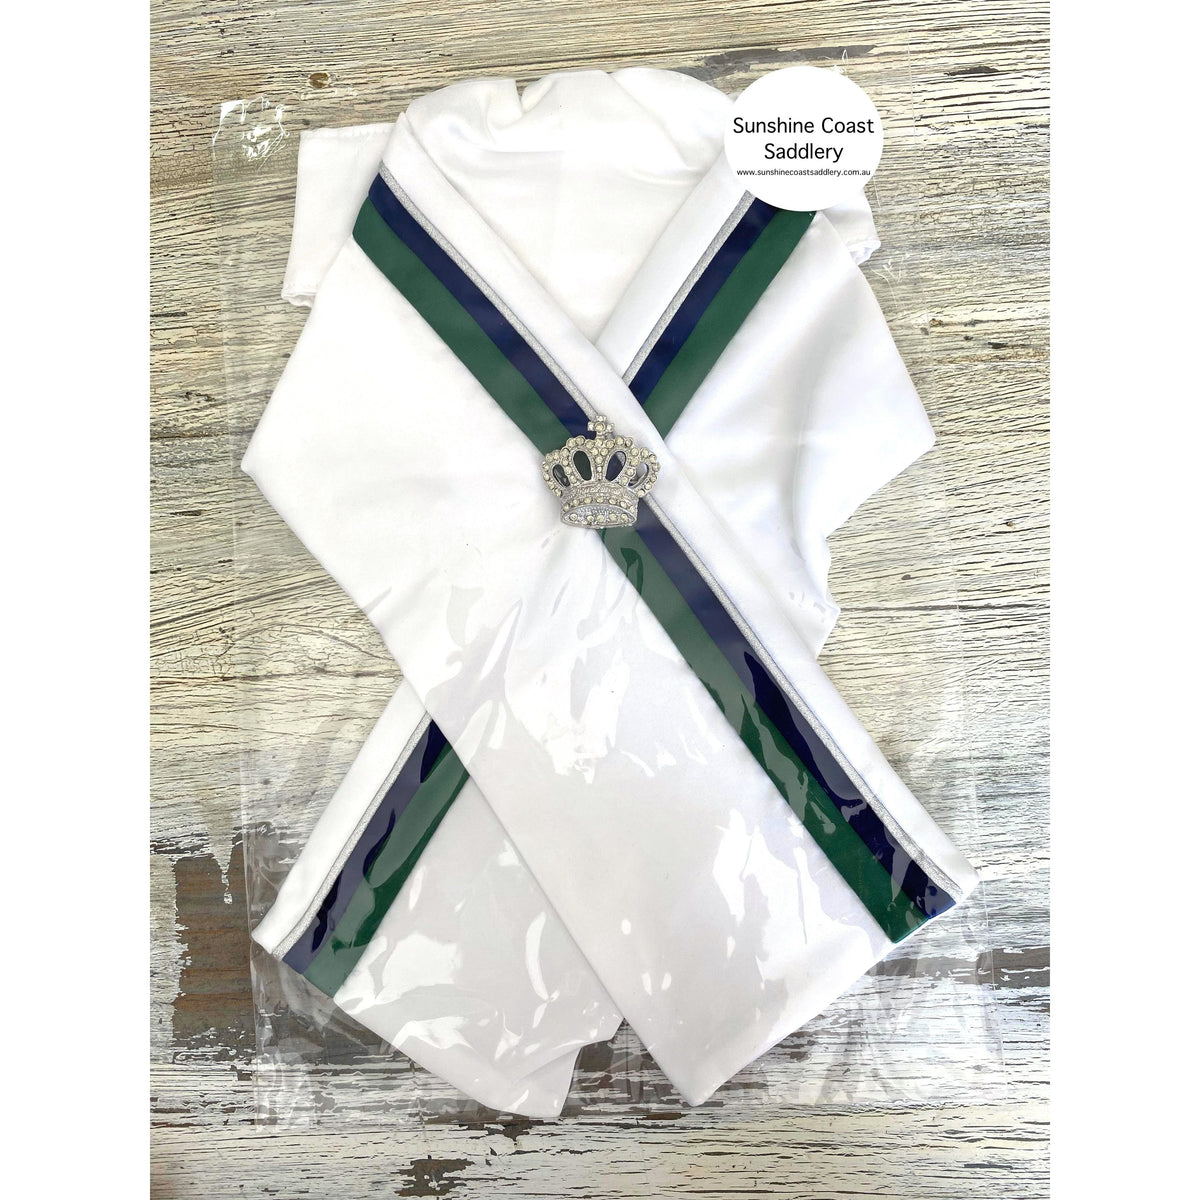 L SHARP Pre-Tied Satin Stock Tie in White with Navy Green Crown